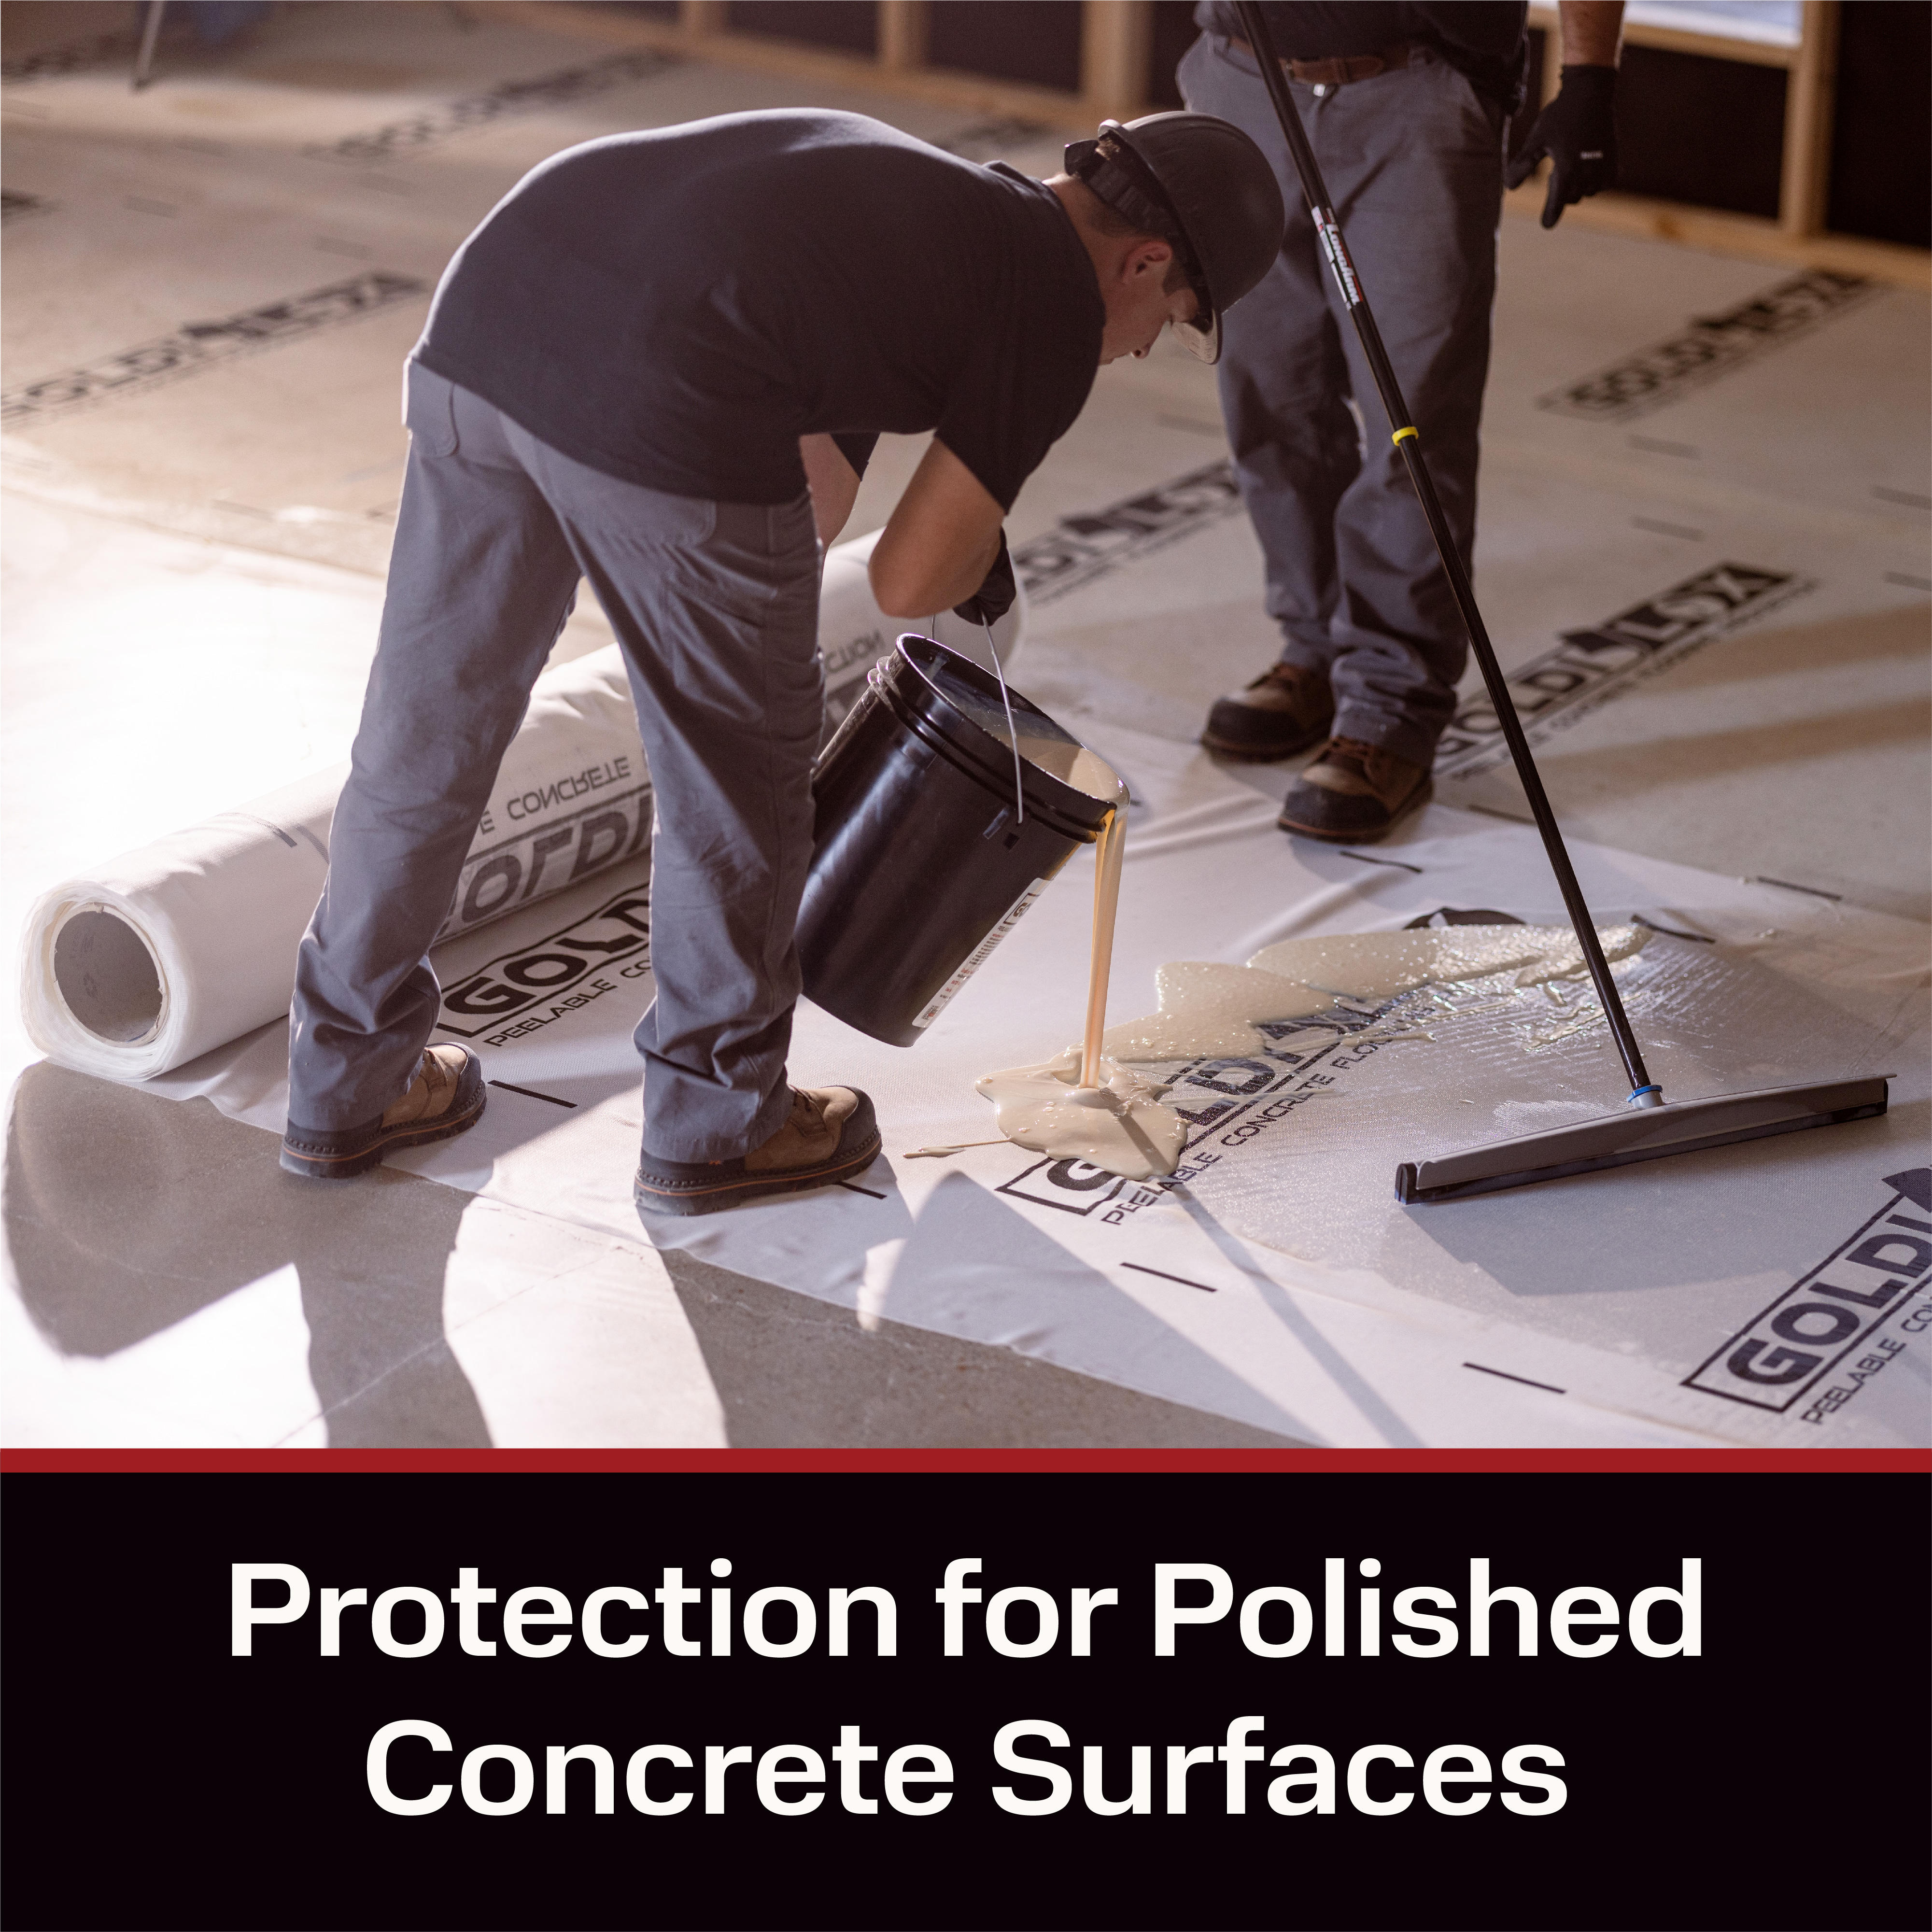 Goldilox Provides Protection for Polished Concrete Surfaces